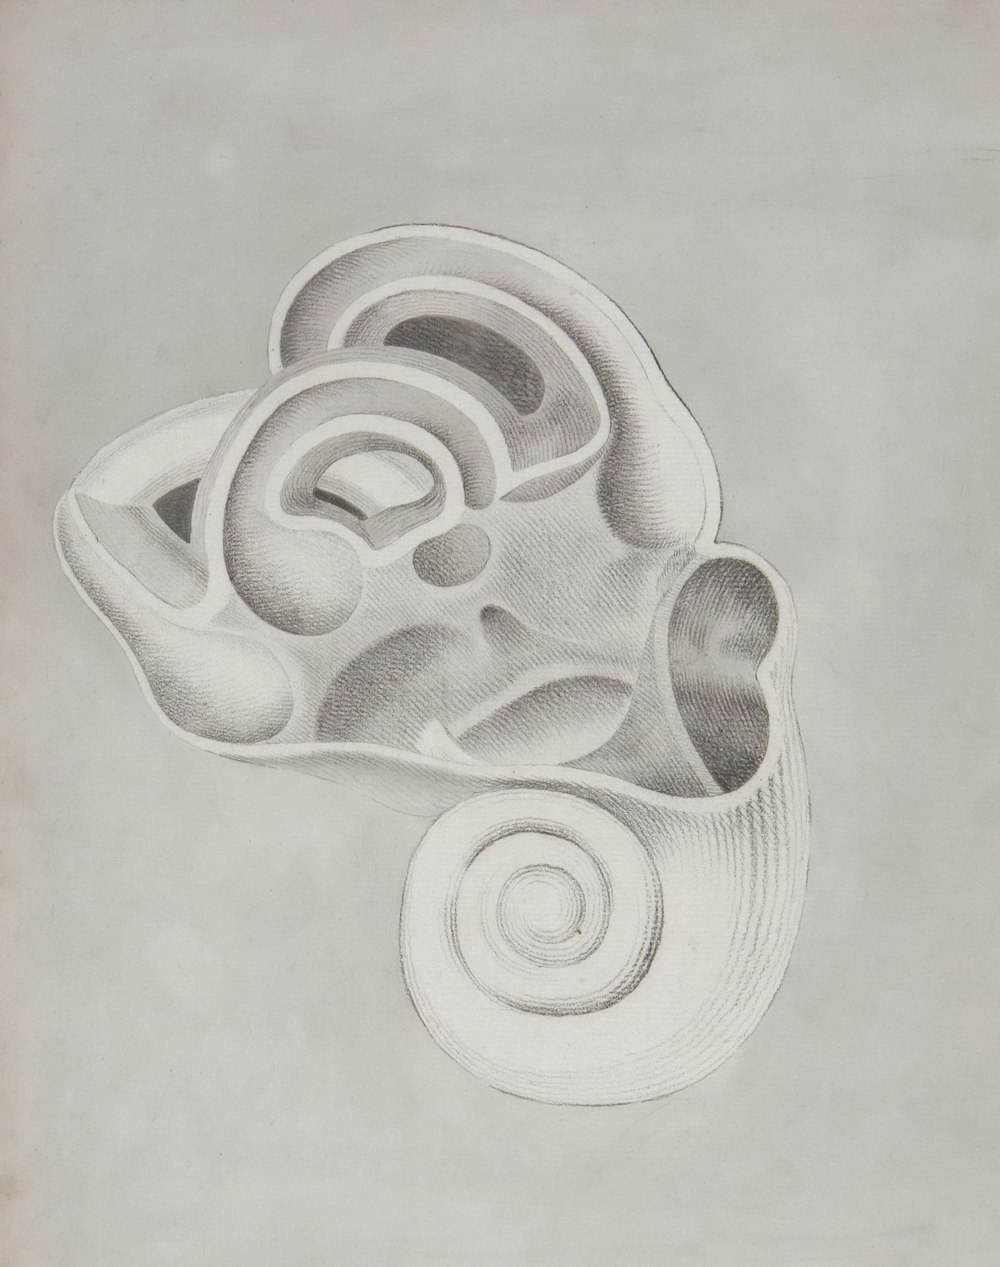 a black and white drawing of a flower